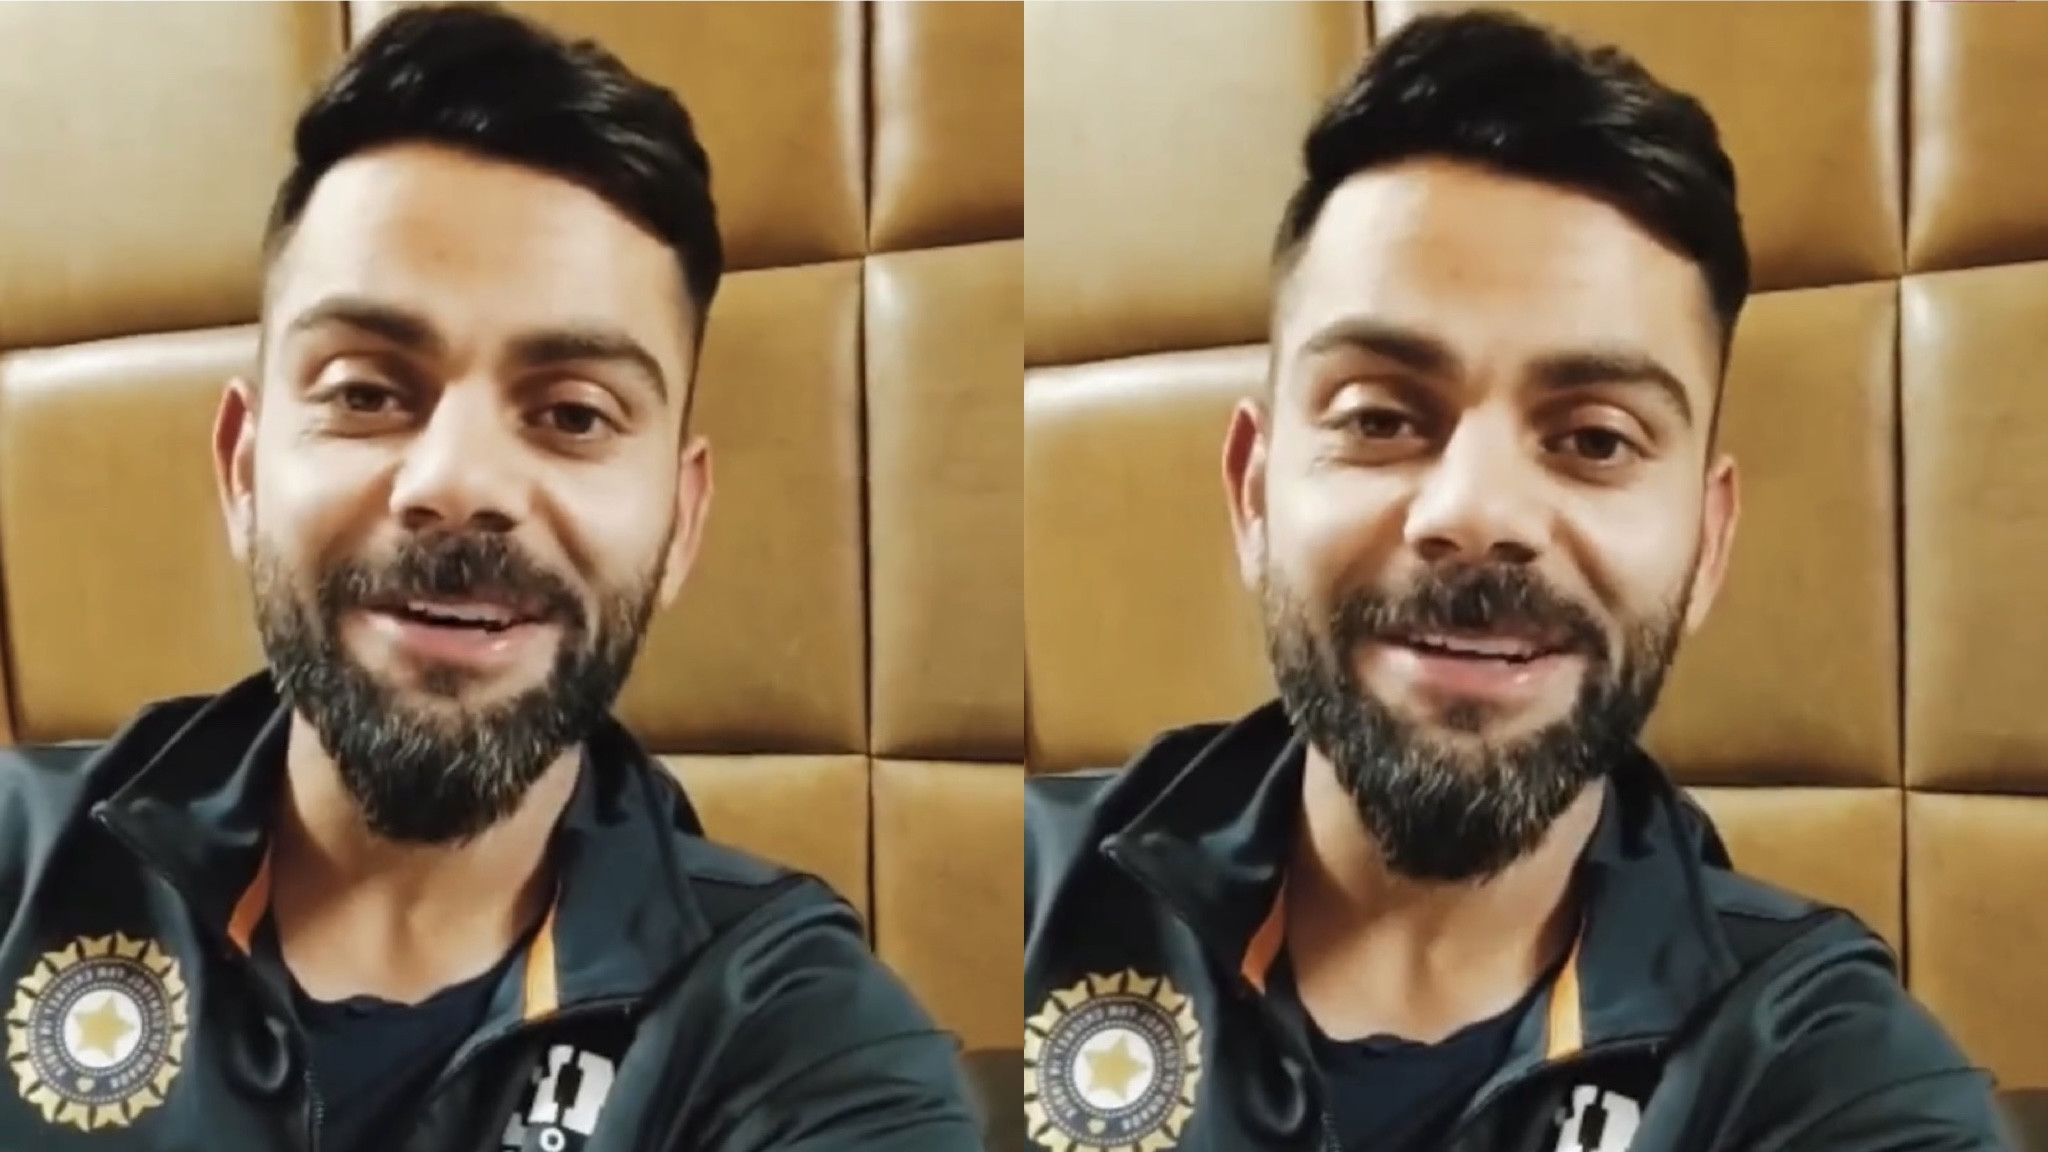 IPL 2022: WATCH - Virat Kohli shares a cryptic message with RCB fans ahead of captaincy announcement